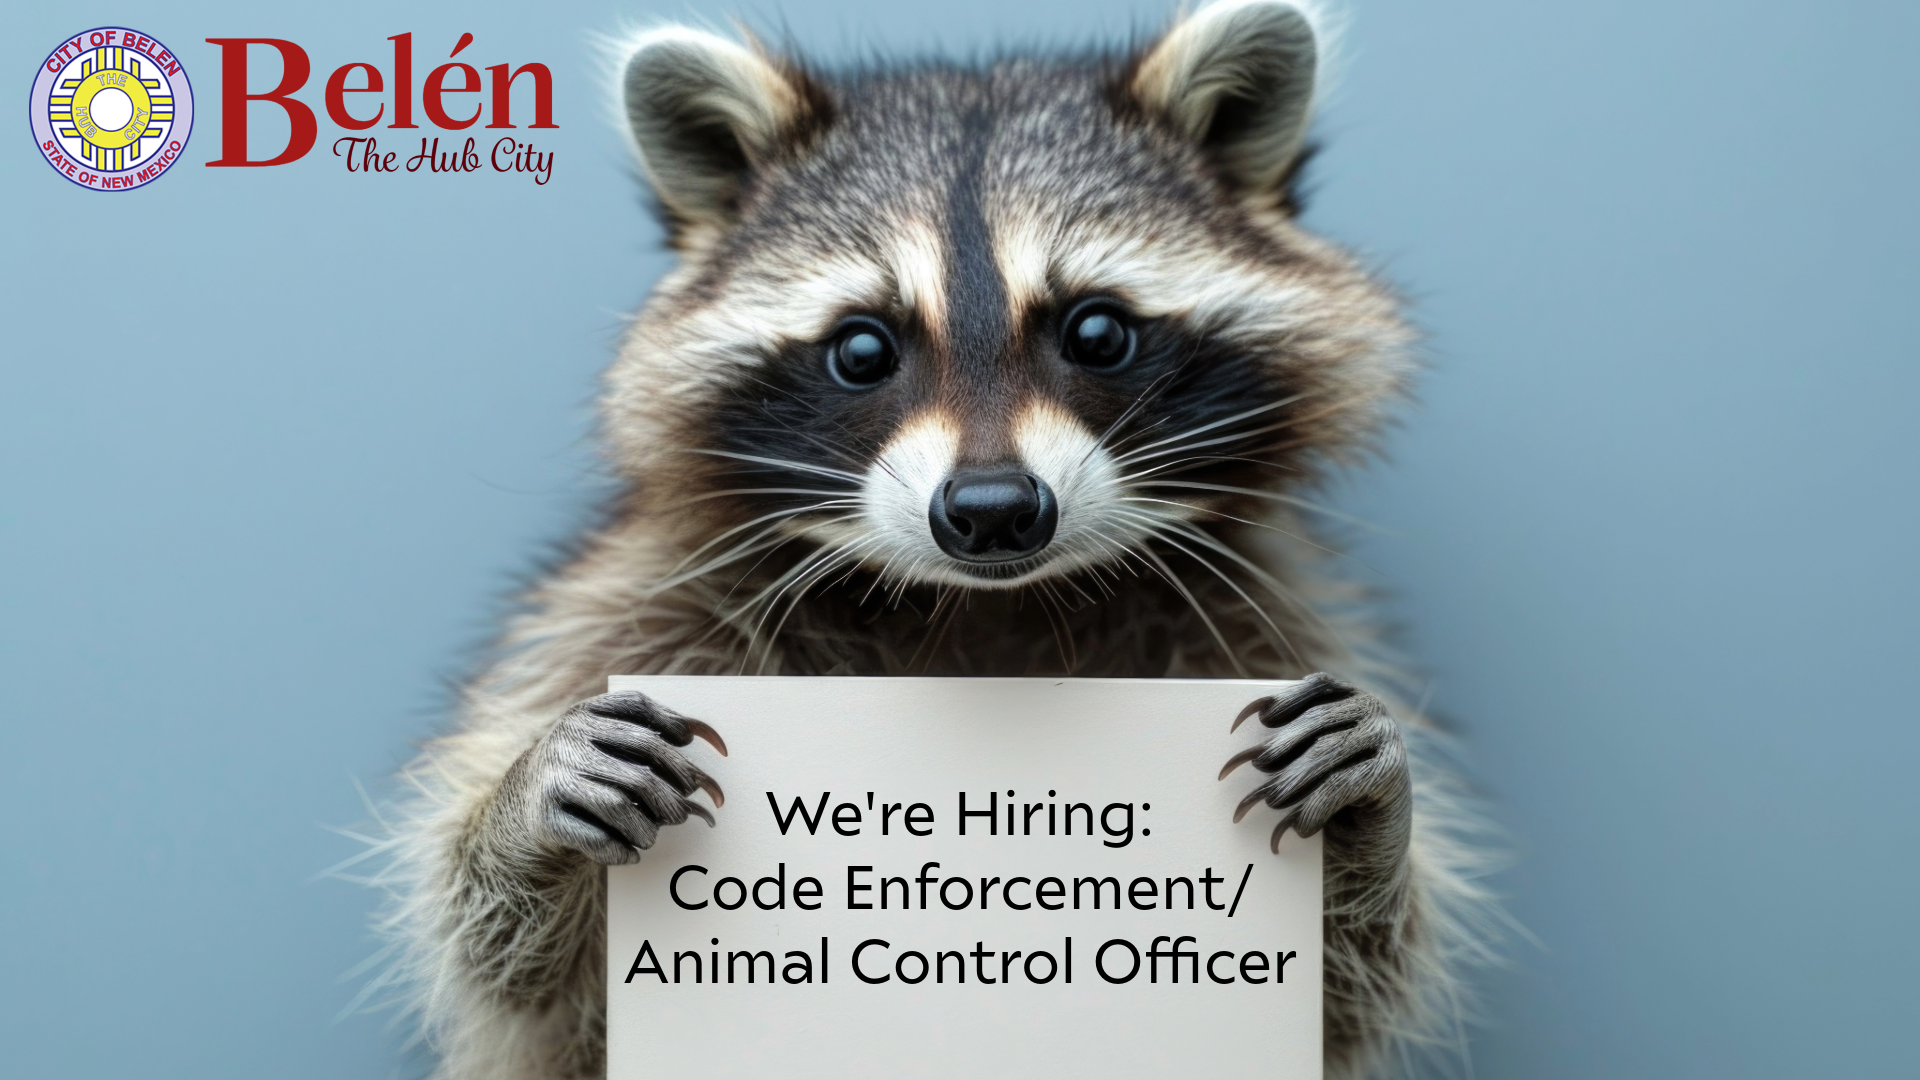 Featured image for “We’re Hiring: Code Enforcement/Animal Control Officer”